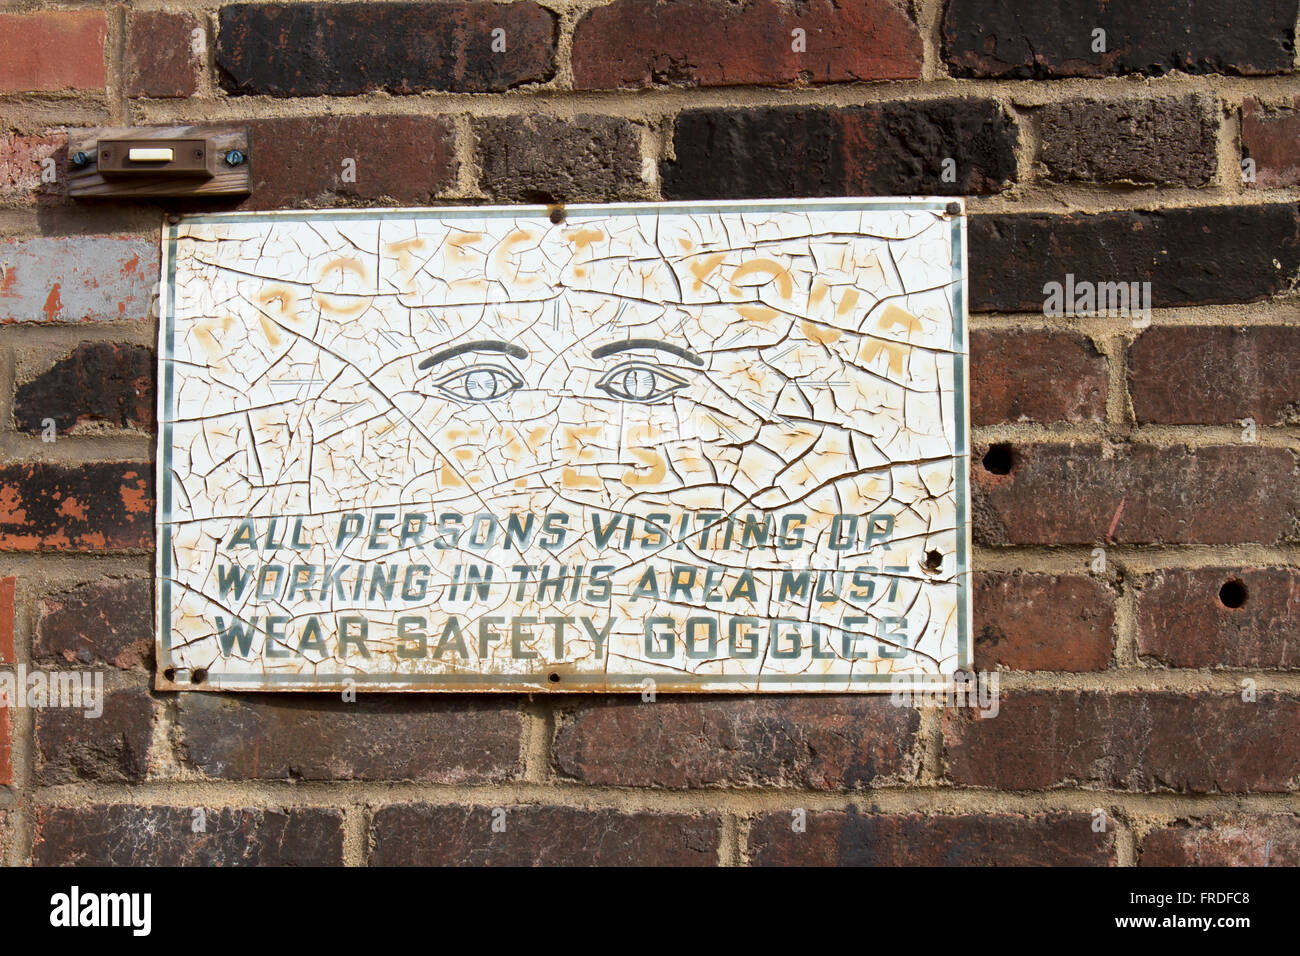 Worn and weathered vintage safety goggles sign on wall of old brick building. Stock Photo